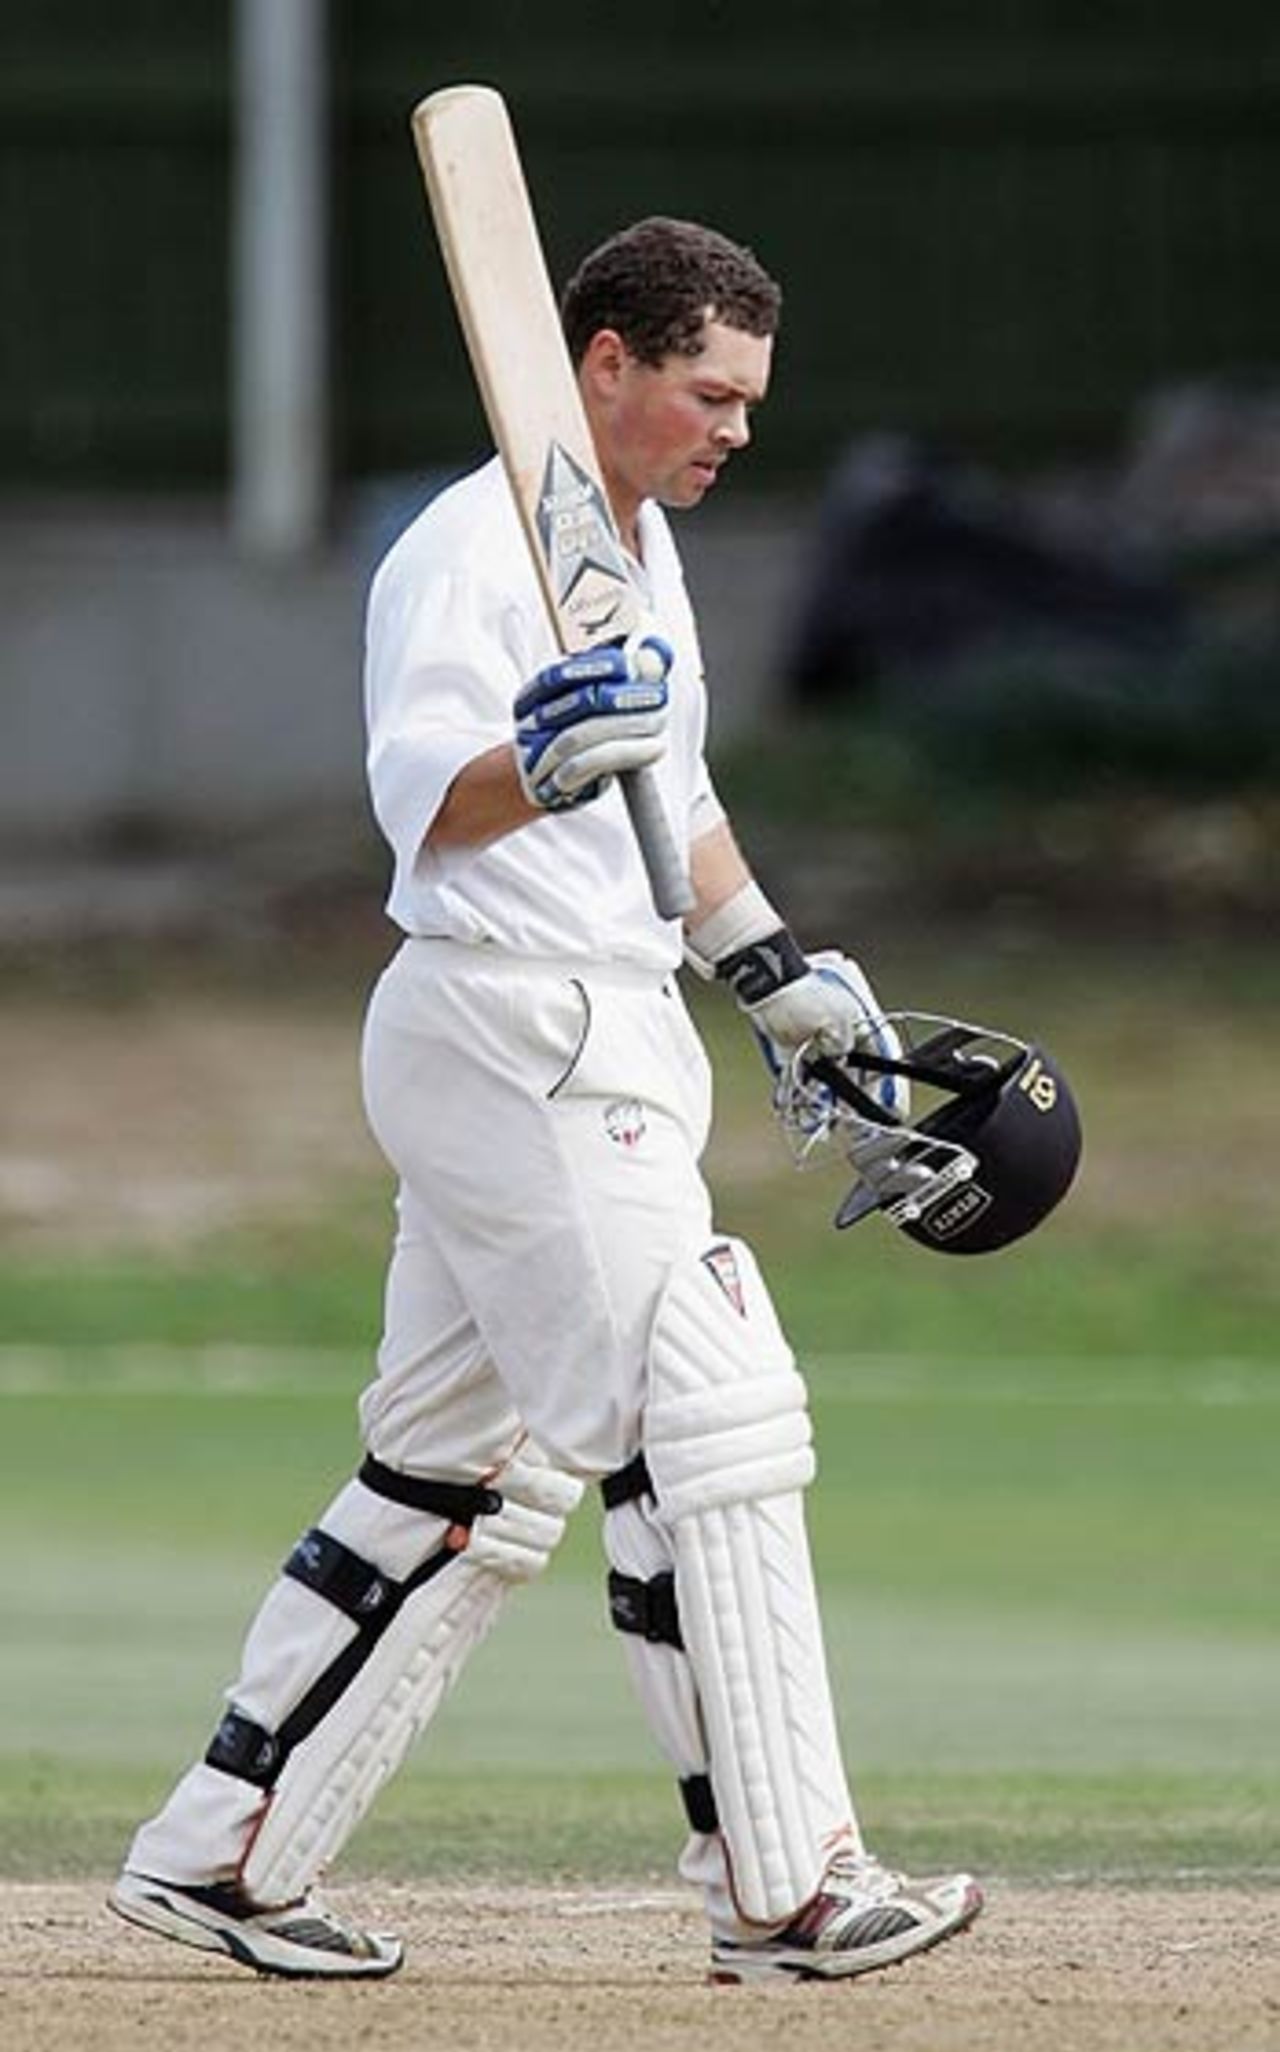 Matthew Bell acknowledges his hundred, Auckland v Wellington, State Championship, 4th day, Eden Park, March 22, 2006